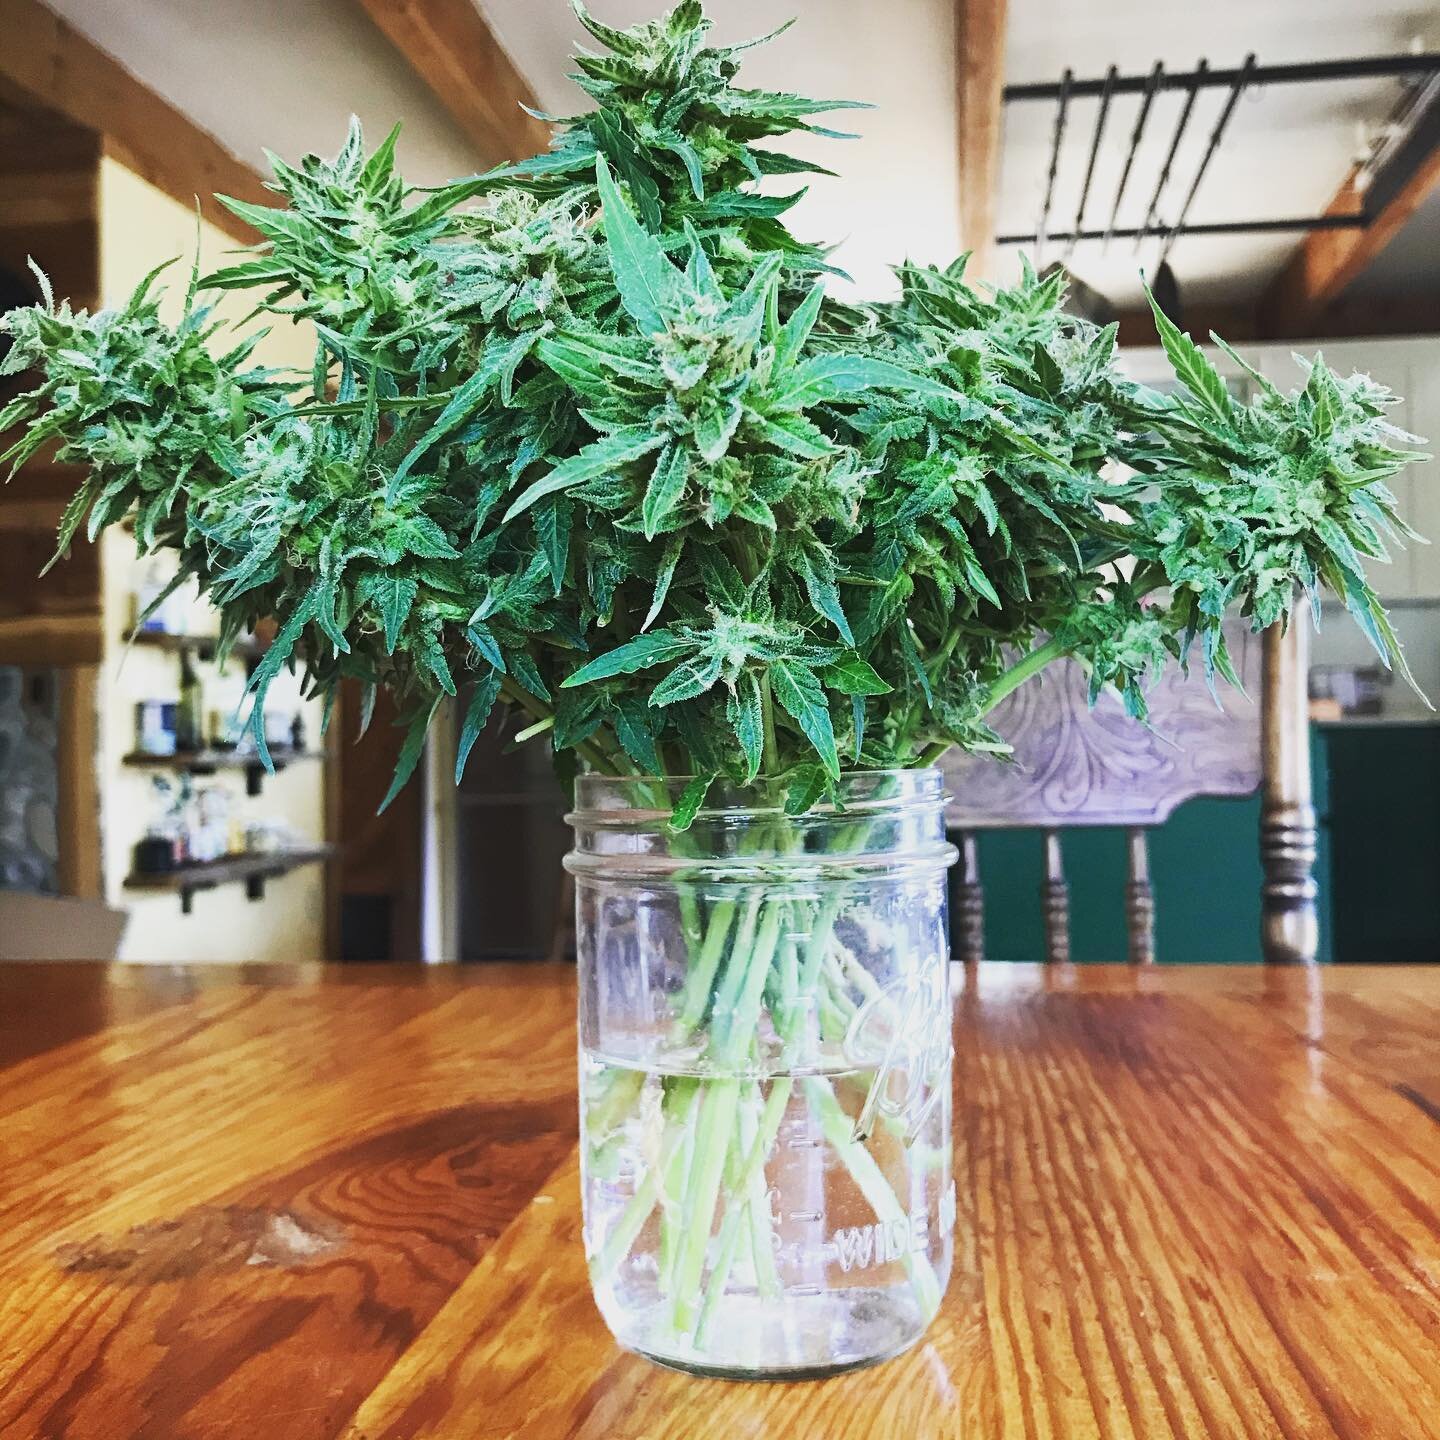 Would you give this bouquet for your bestie&rsquo;s birthday? 🎂
What about Valentine&rsquo;s Day? ❤️ 
Mother&rsquo;s Day? 🌟

Loving these early finishing  #sourrna #autoflower from @oregoncbd 

#giftgivingideas #bouquetofflowers #loveyou #behappyan